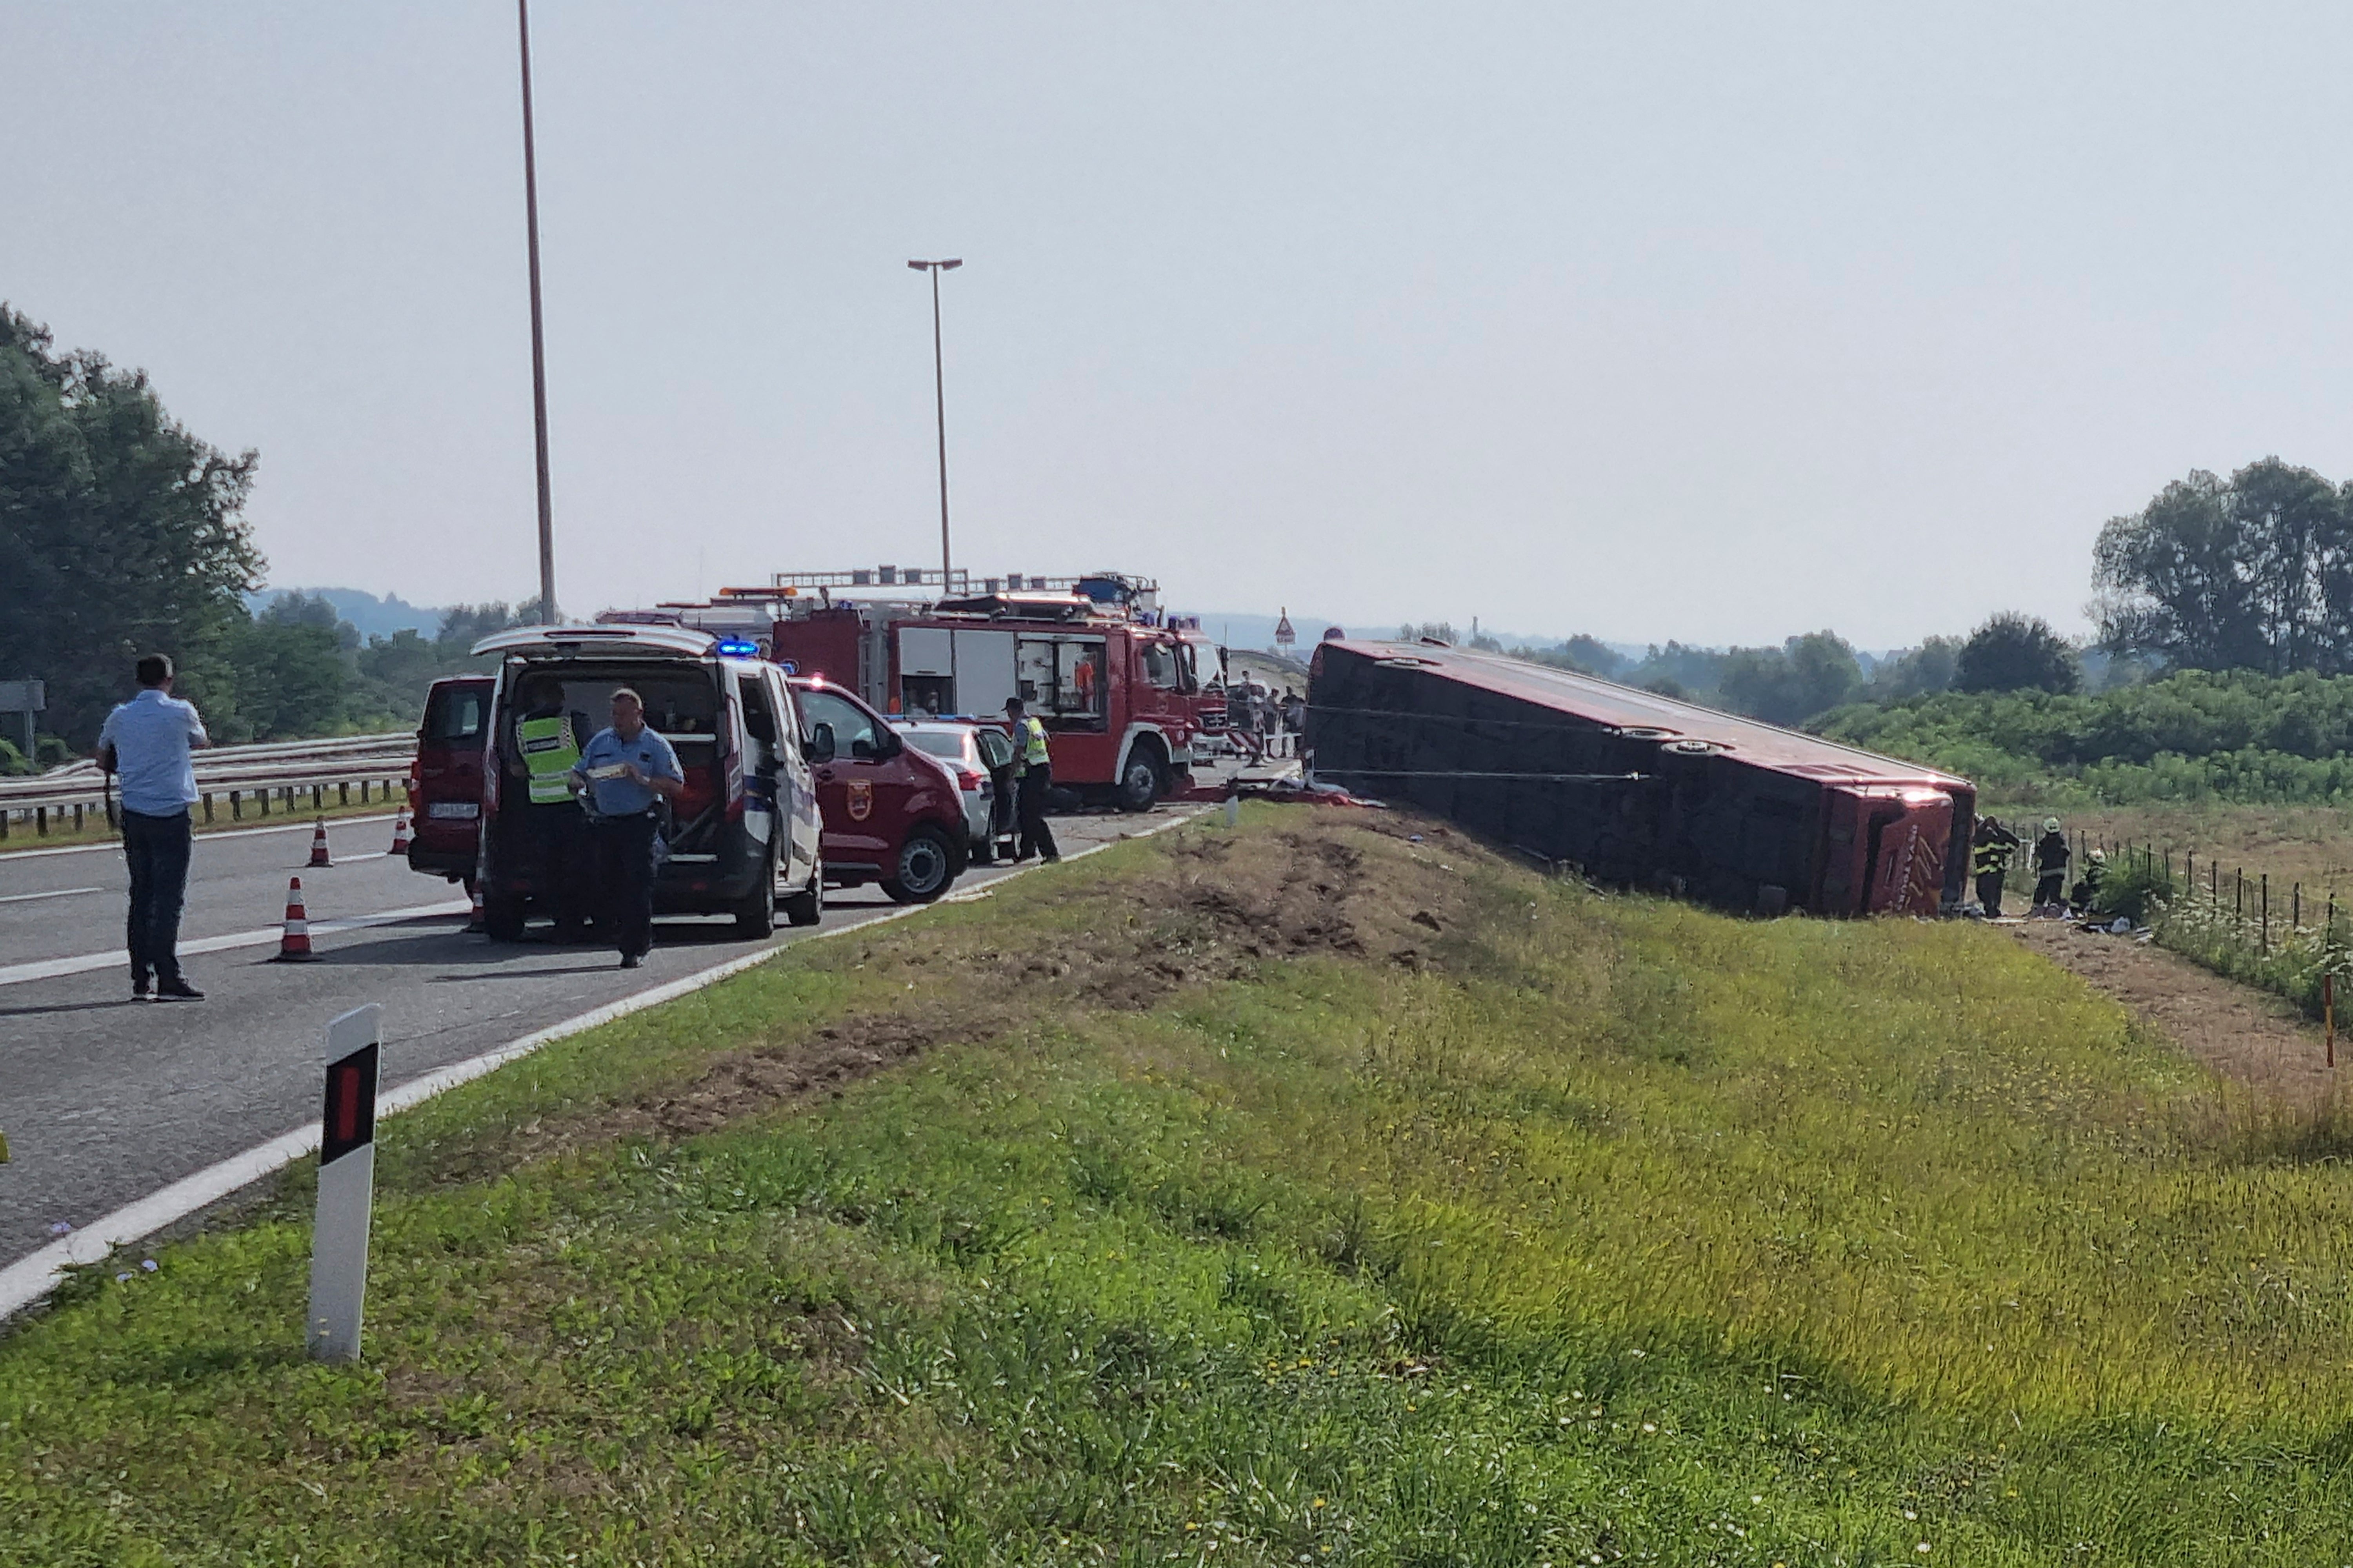 Emergency crews work at the site of a bus accident near Slavonski Brod, Croatia, Sunday, July 25, 2021